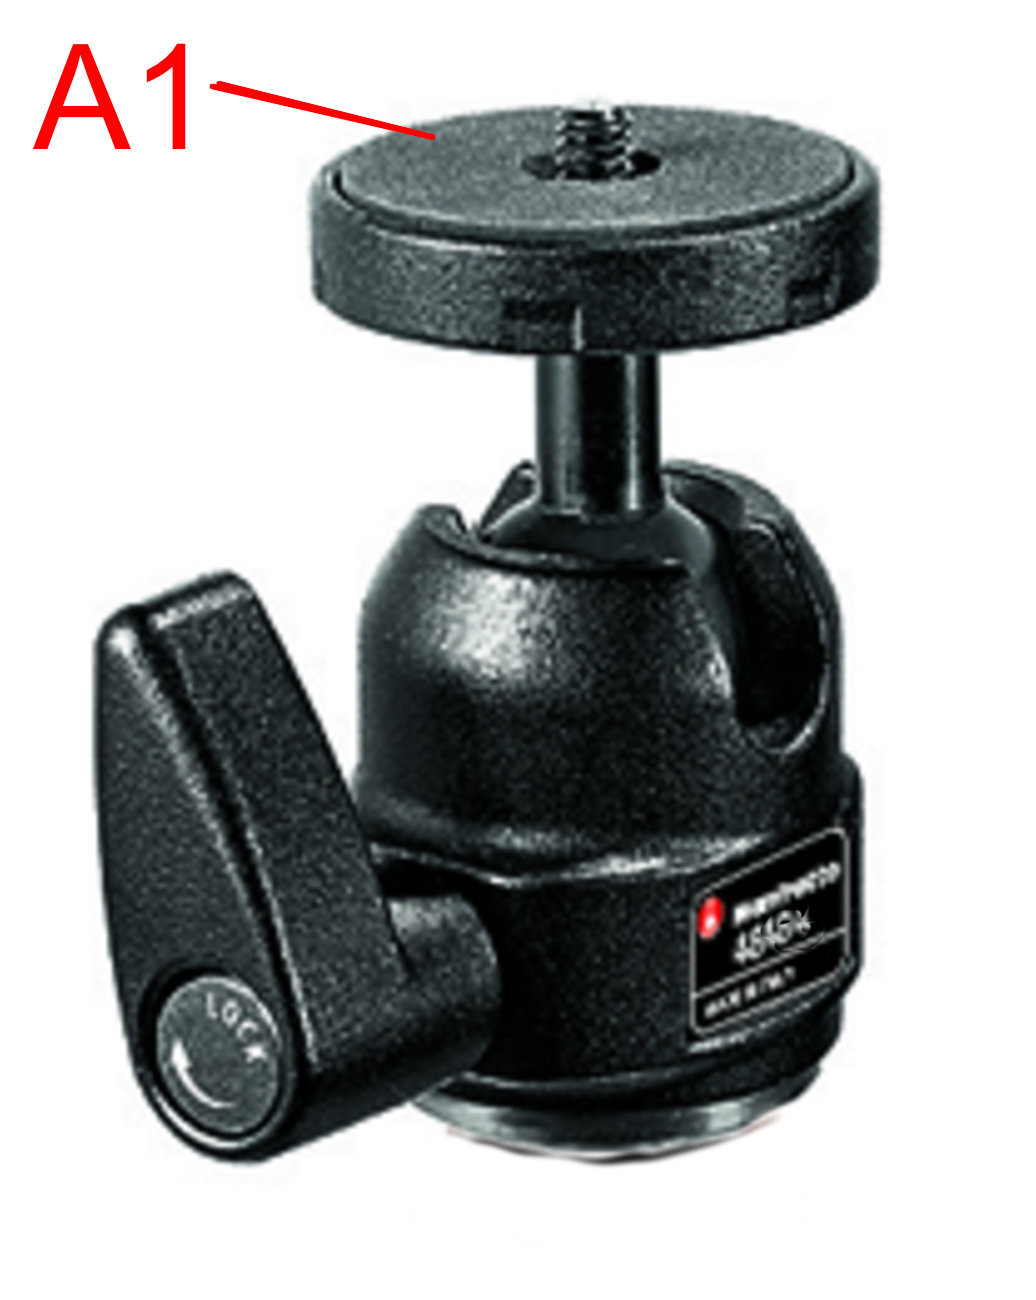 Manfrotto 482RC2 Ball Head